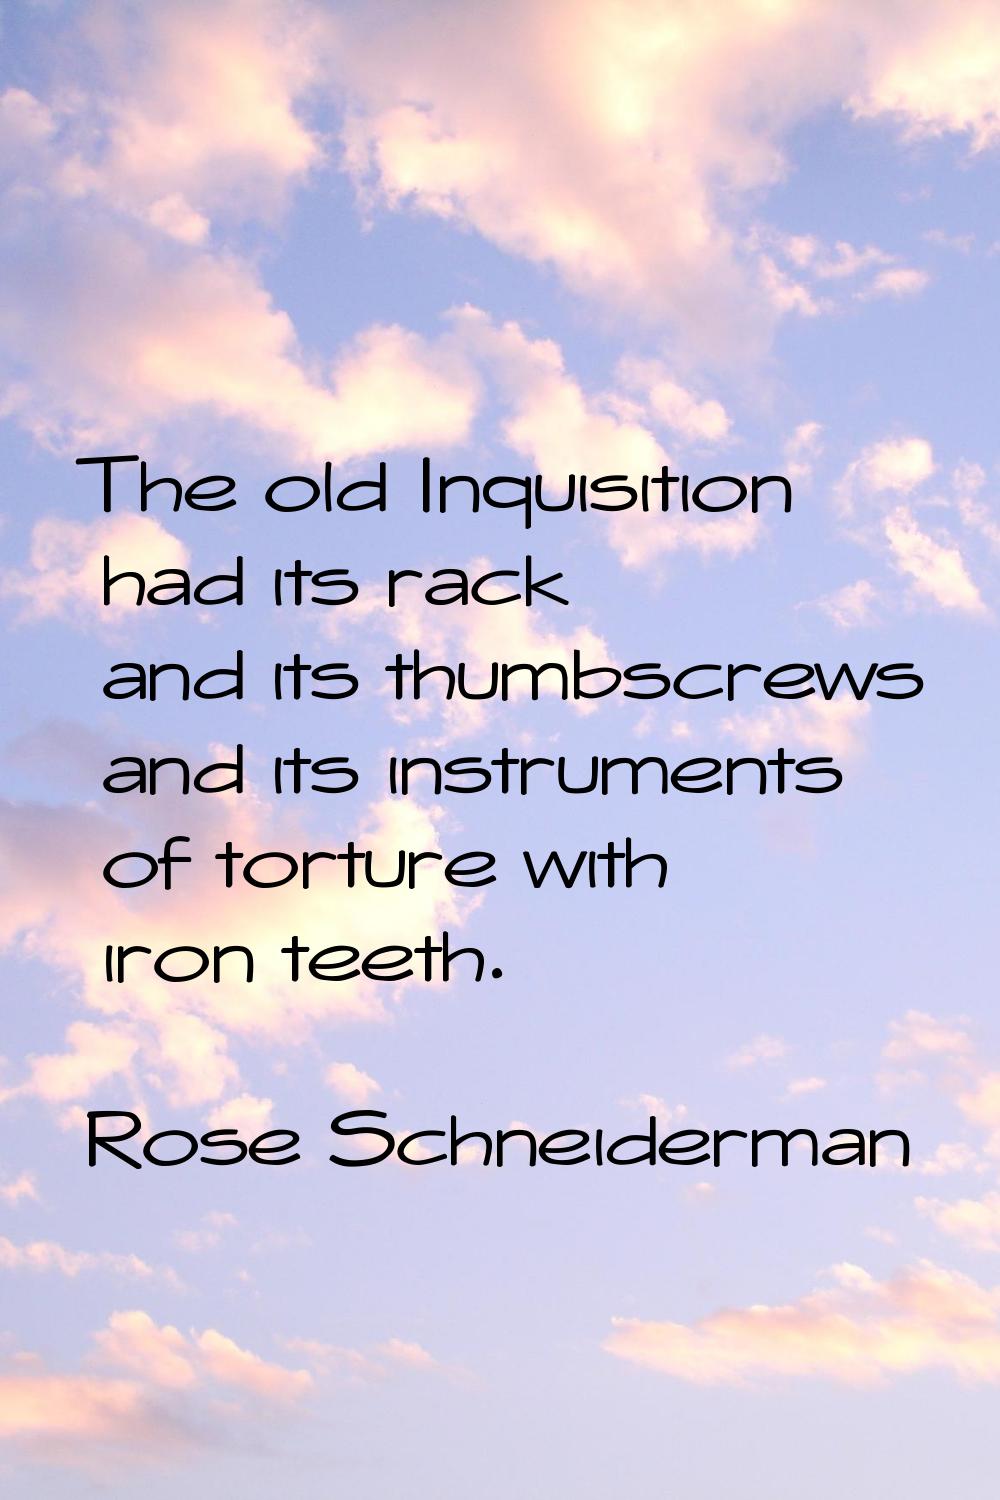 The old Inquisition had its rack and its thumbscrews and its instruments of torture with iron teeth